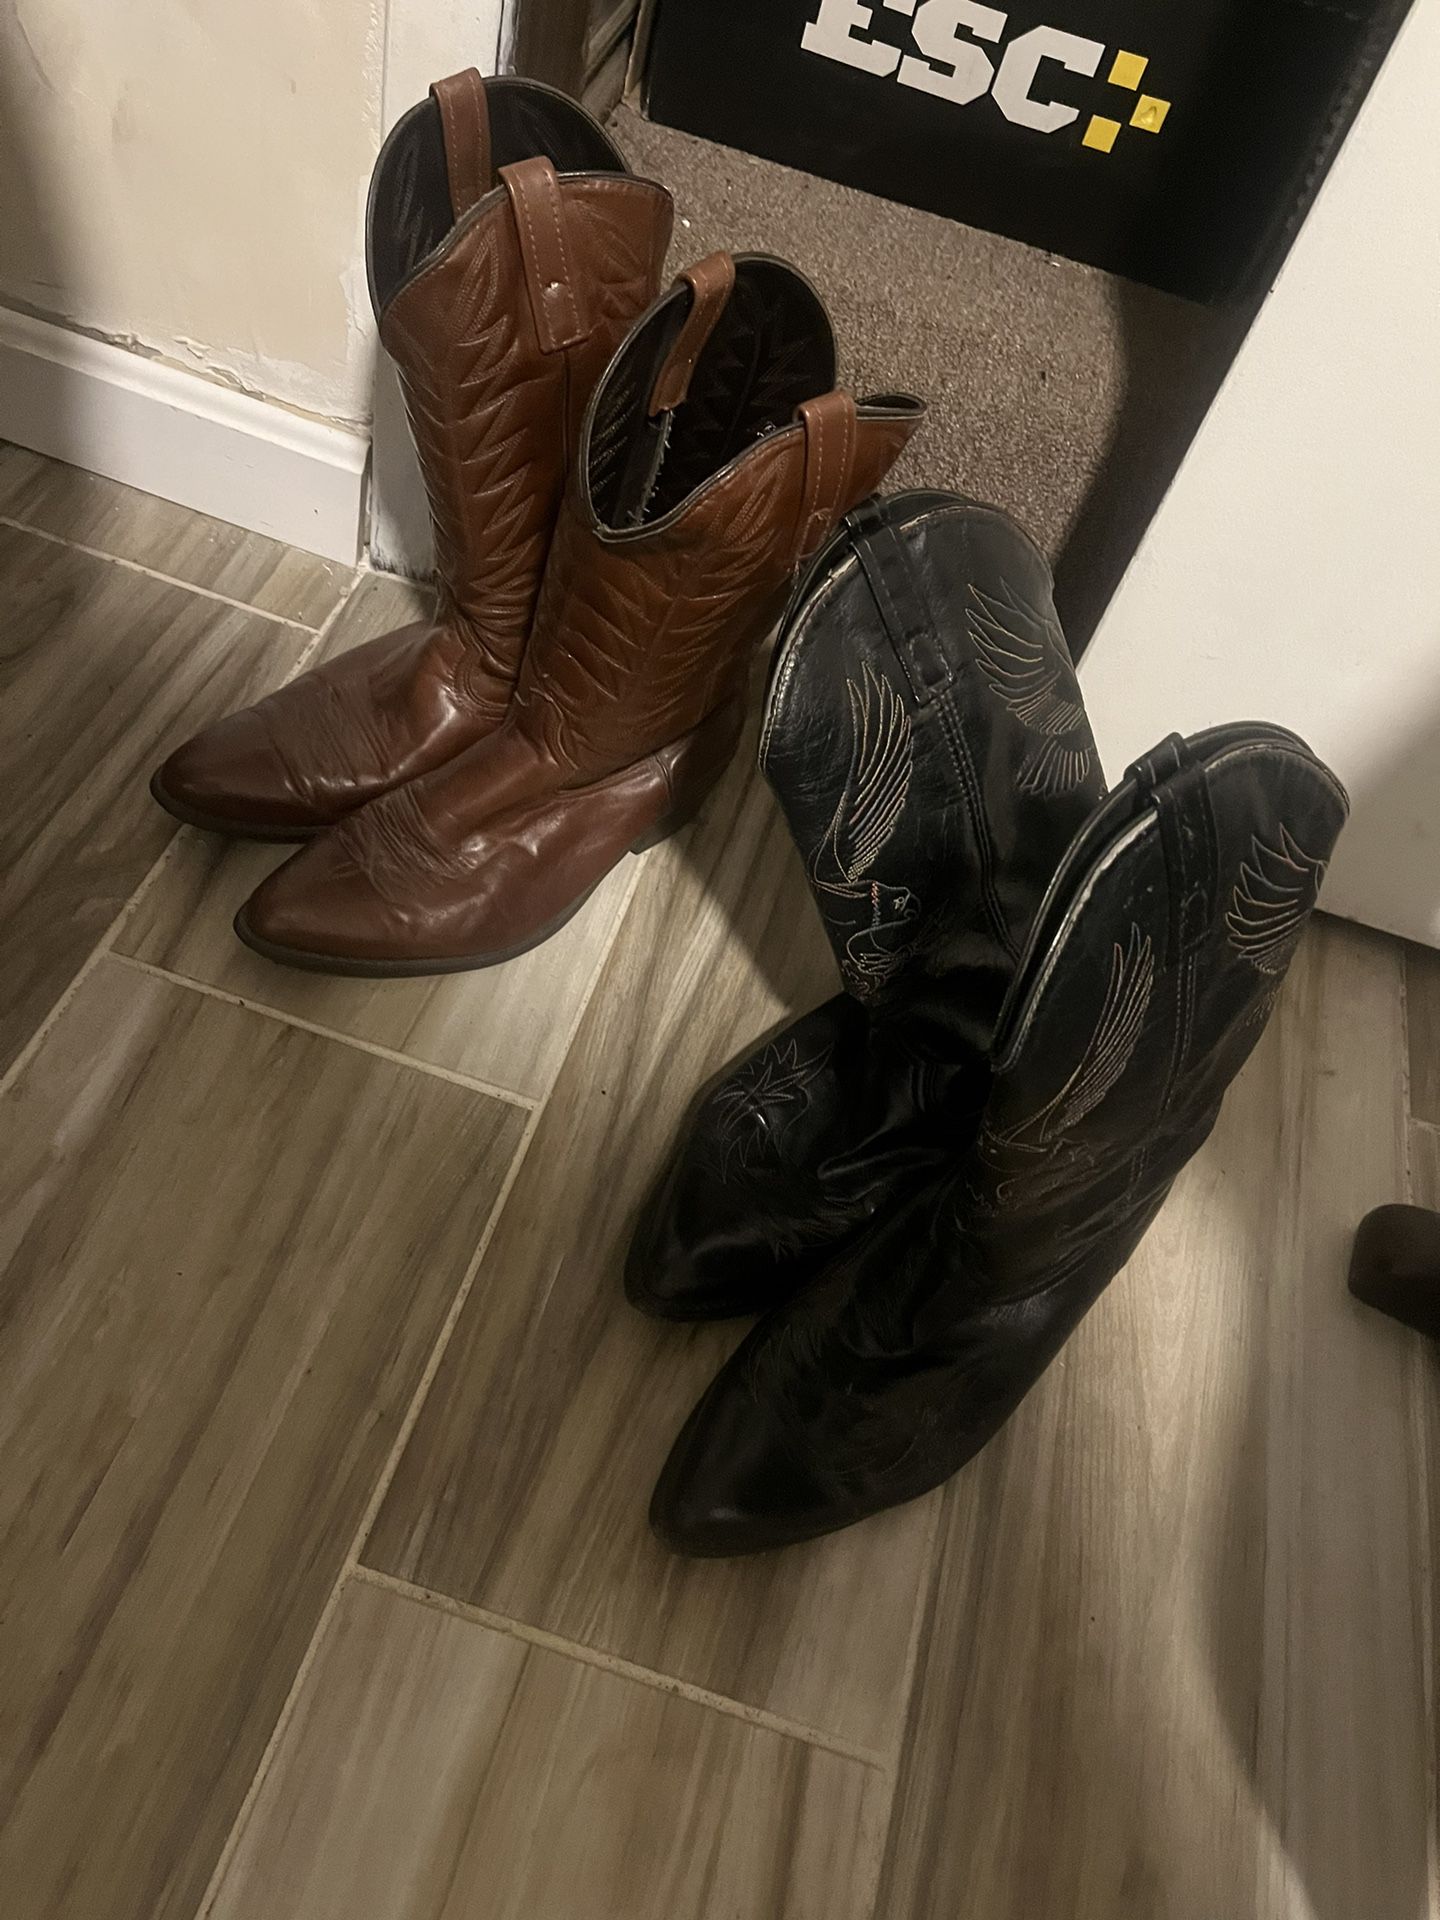 Pair Of Leather Boots 12 D Made In USA 